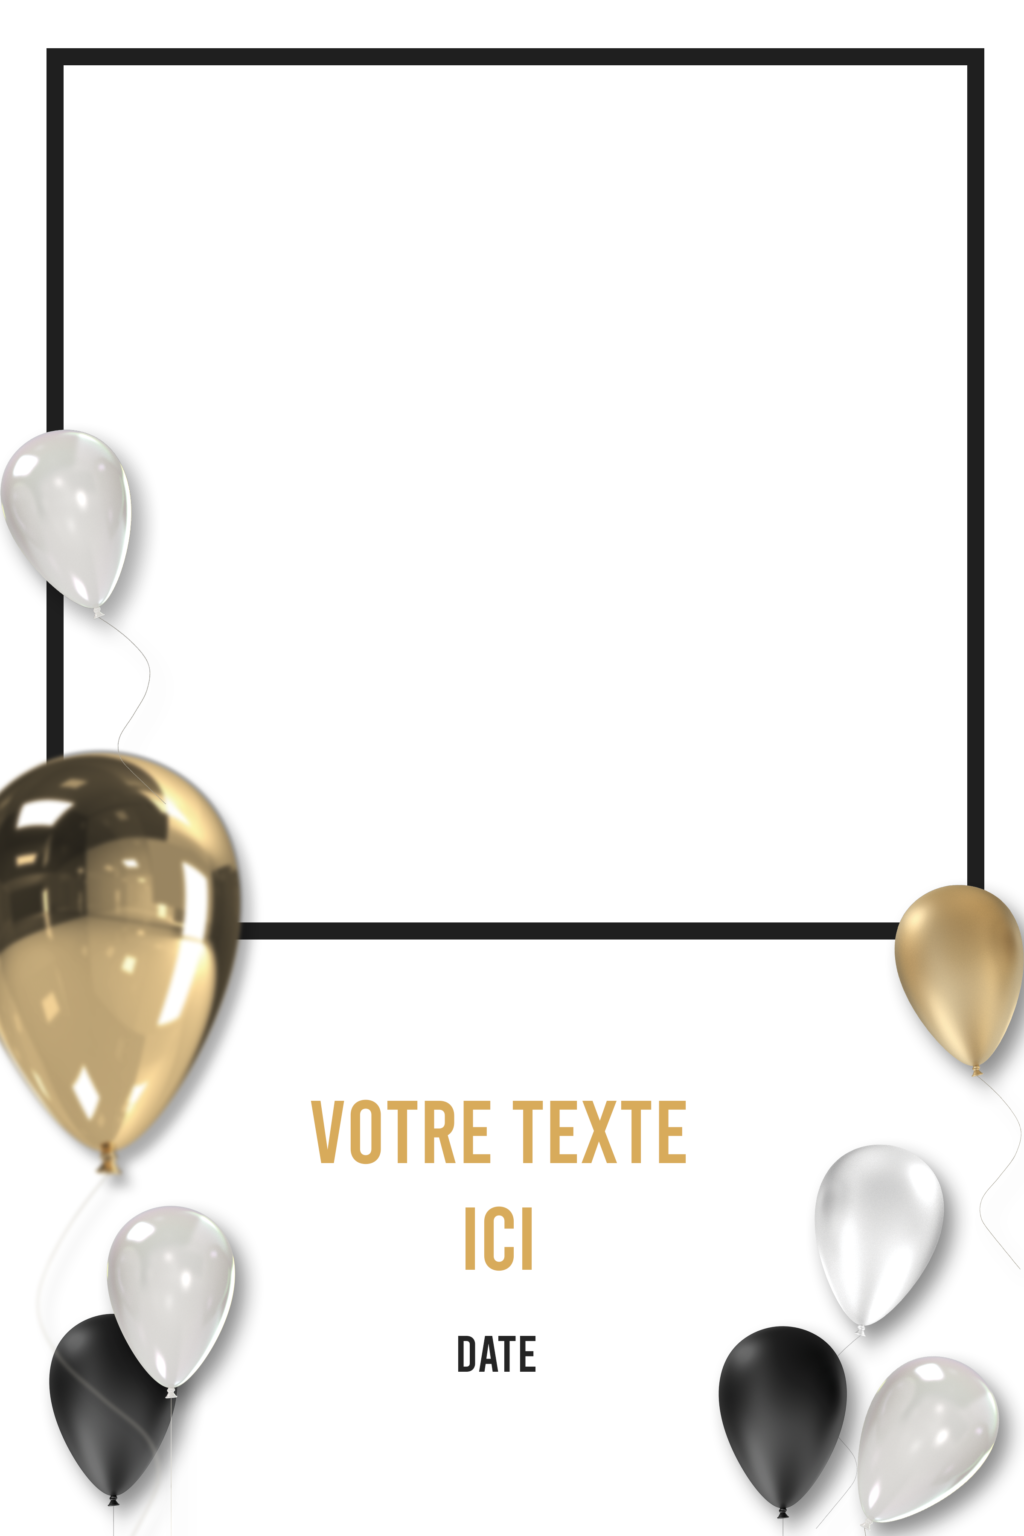 template photobooth download